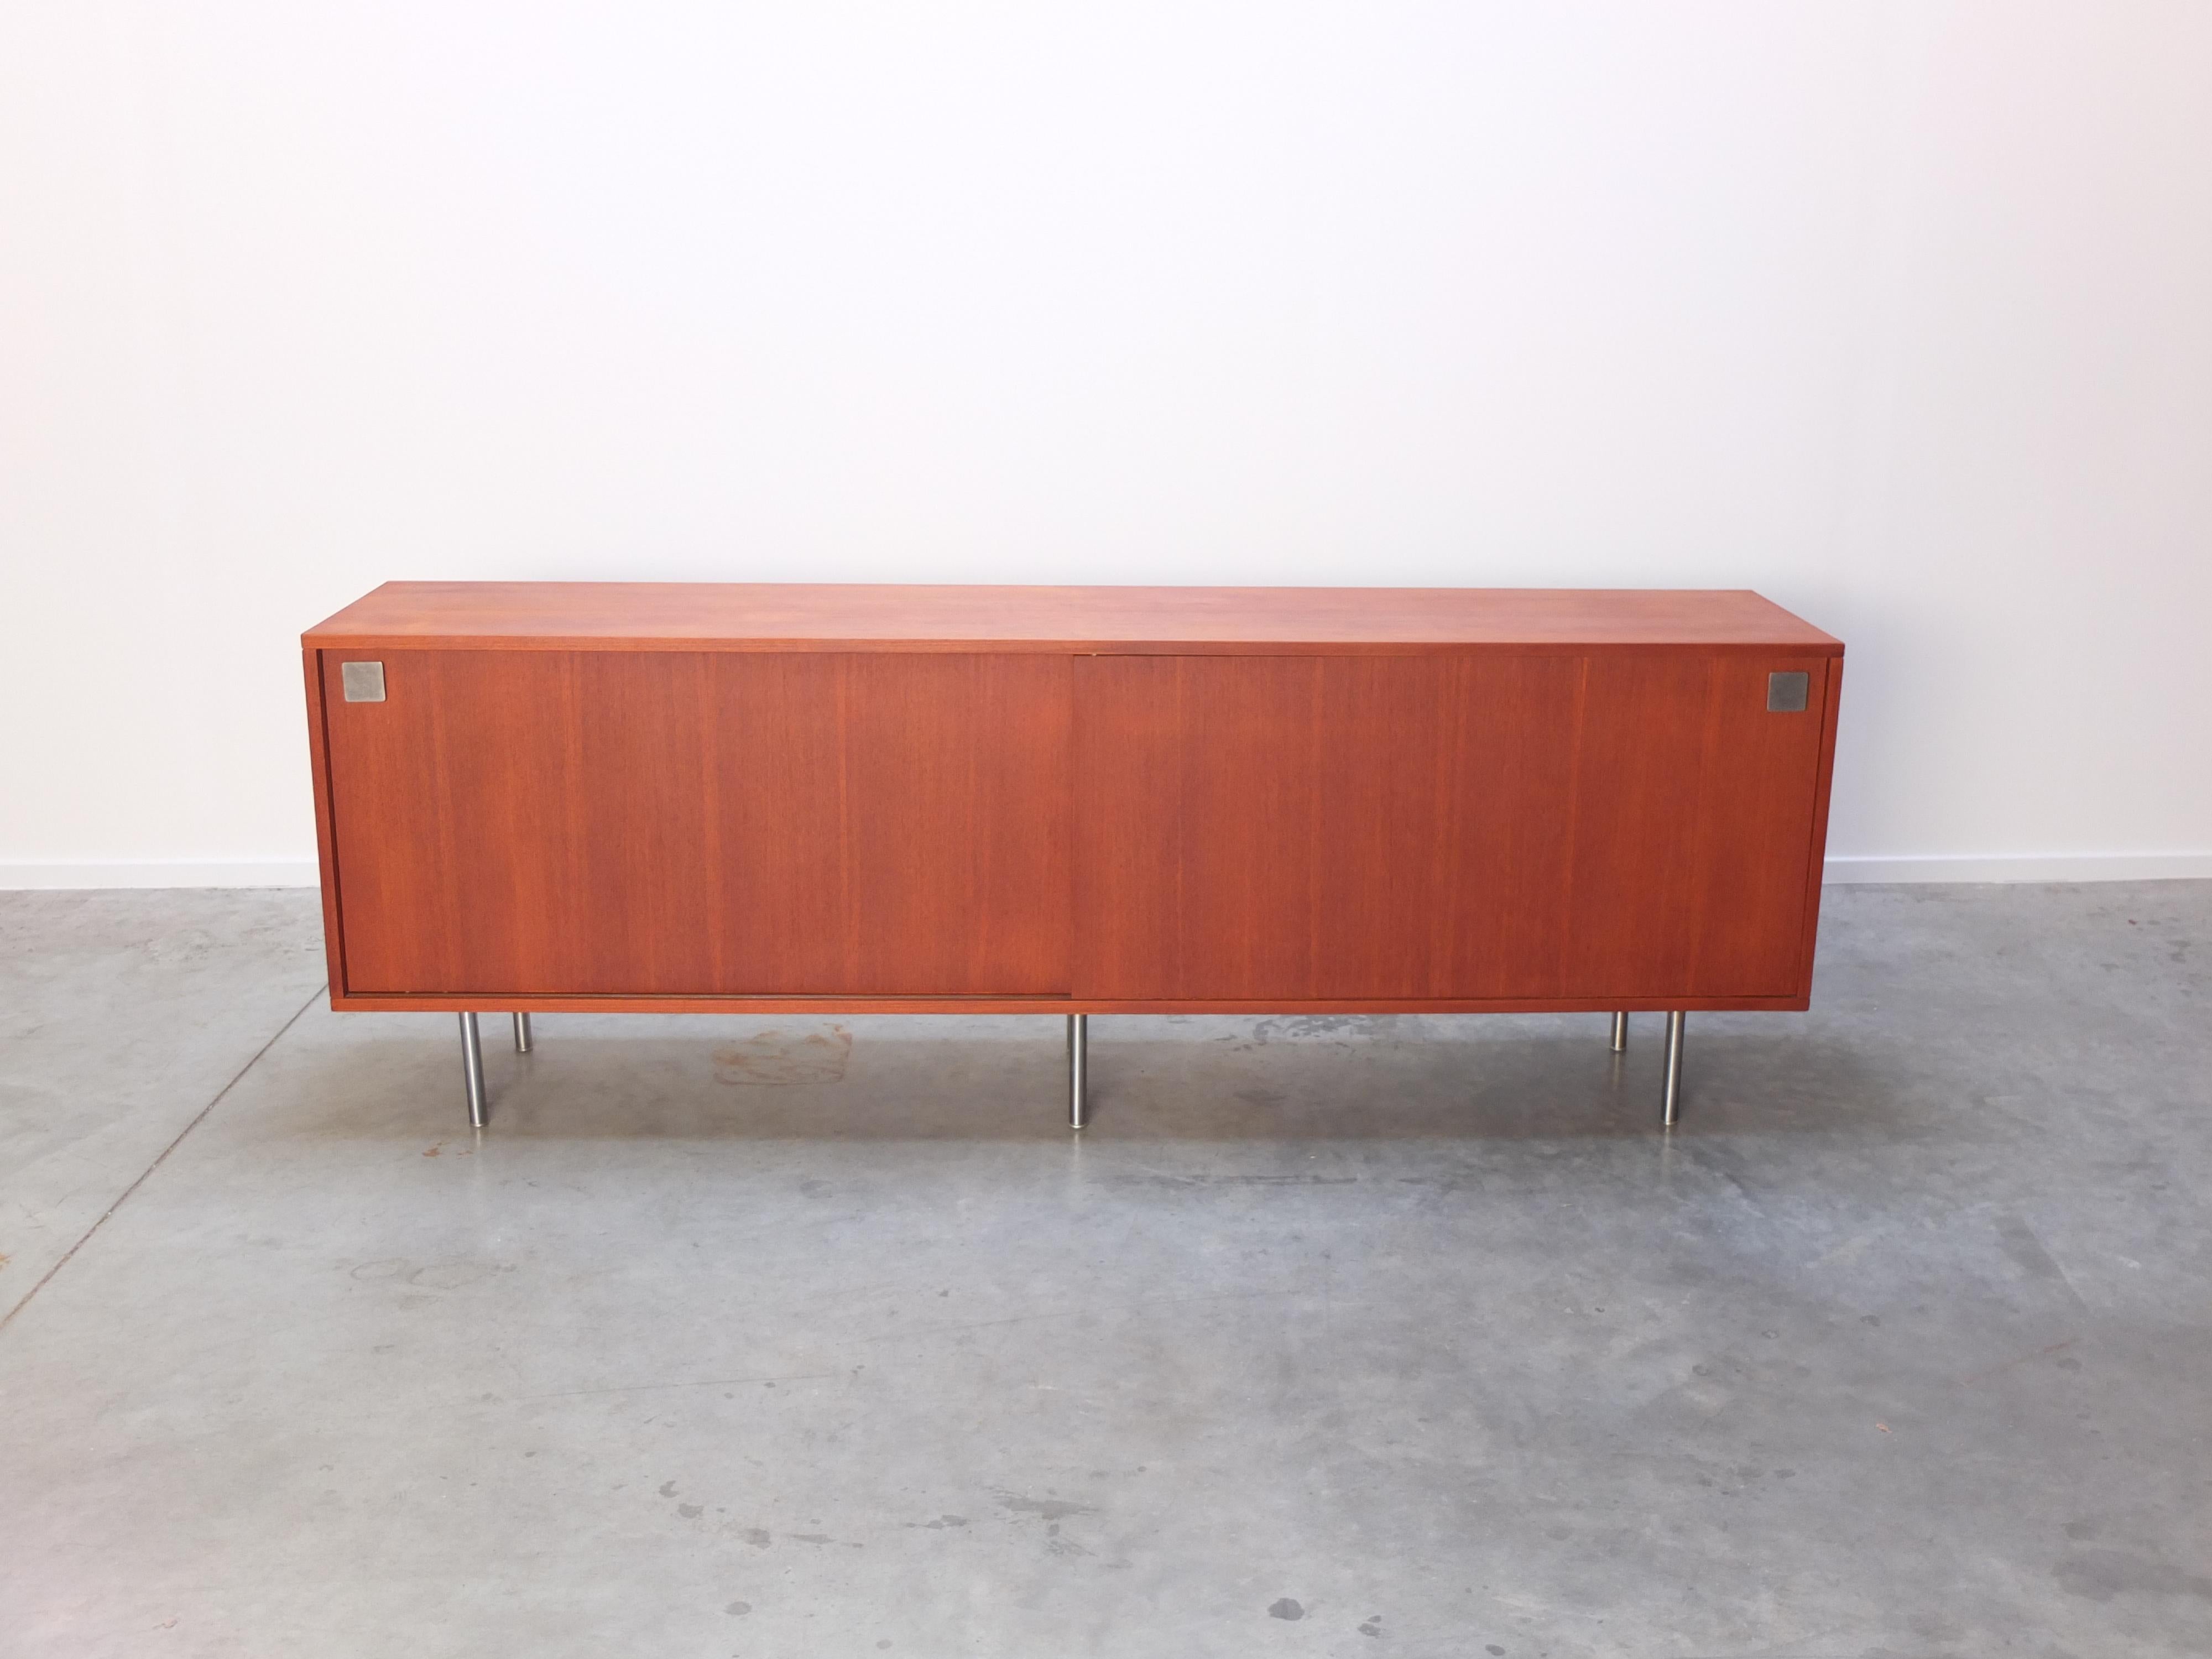 Large minimalist sideboard designed by Alfred Hendrickx and produced in Belgium by Belform during the 1960s. Made of teak wood with metal door handles and not so common metal circular legs. This sideboard can also be mounted to the wall for an even